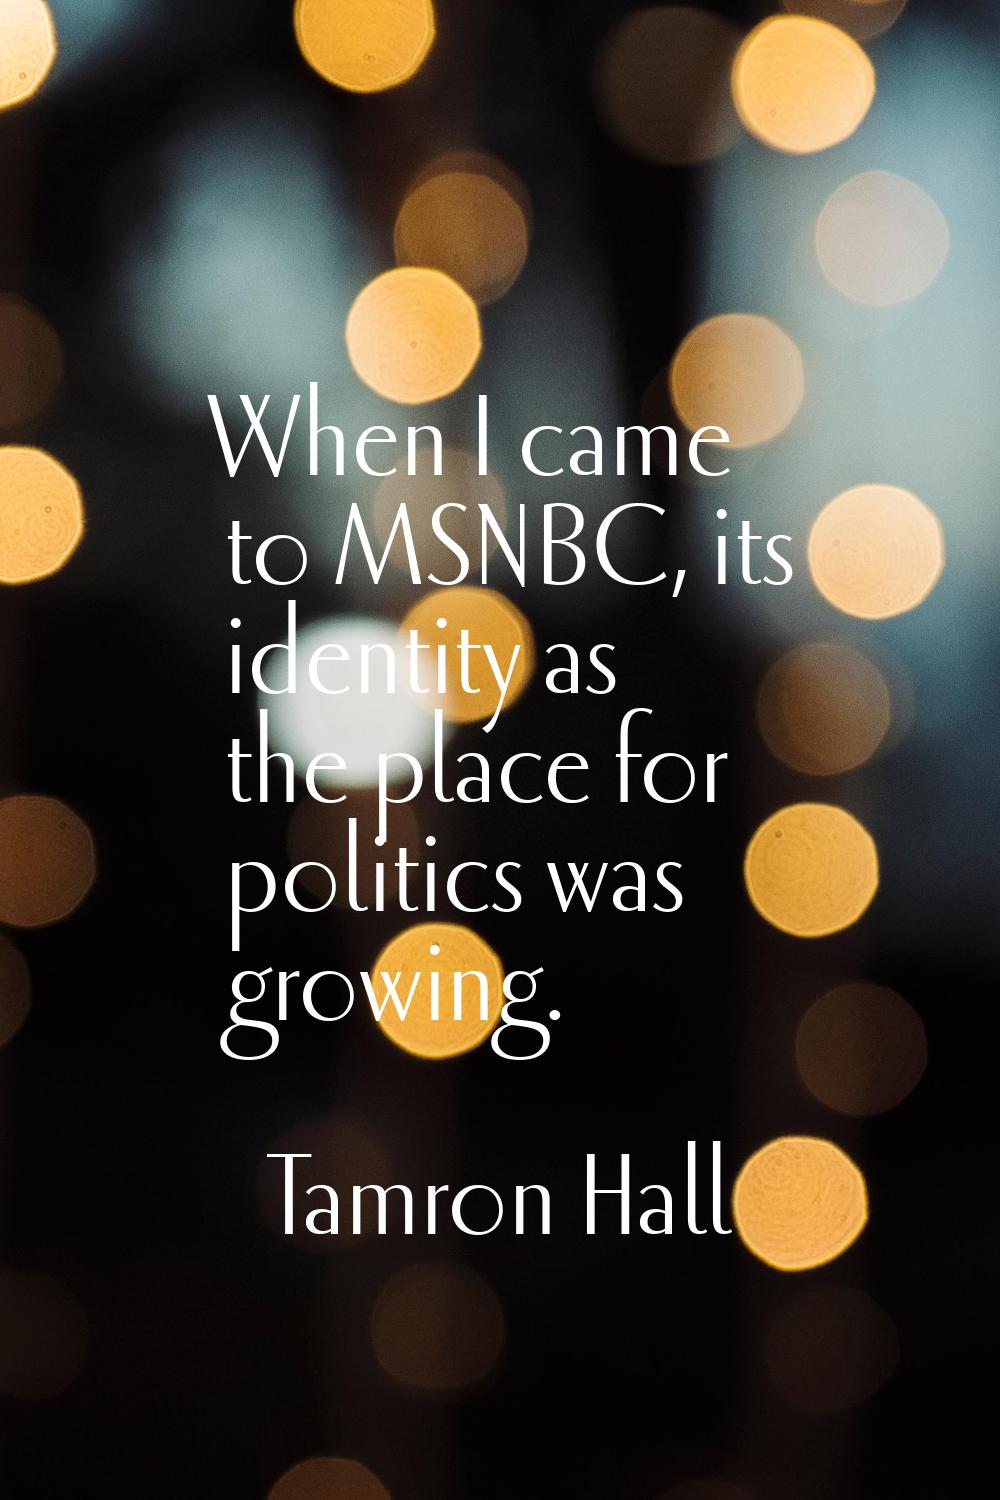 When I came to MSNBC, its identity as the place for politics was growing.